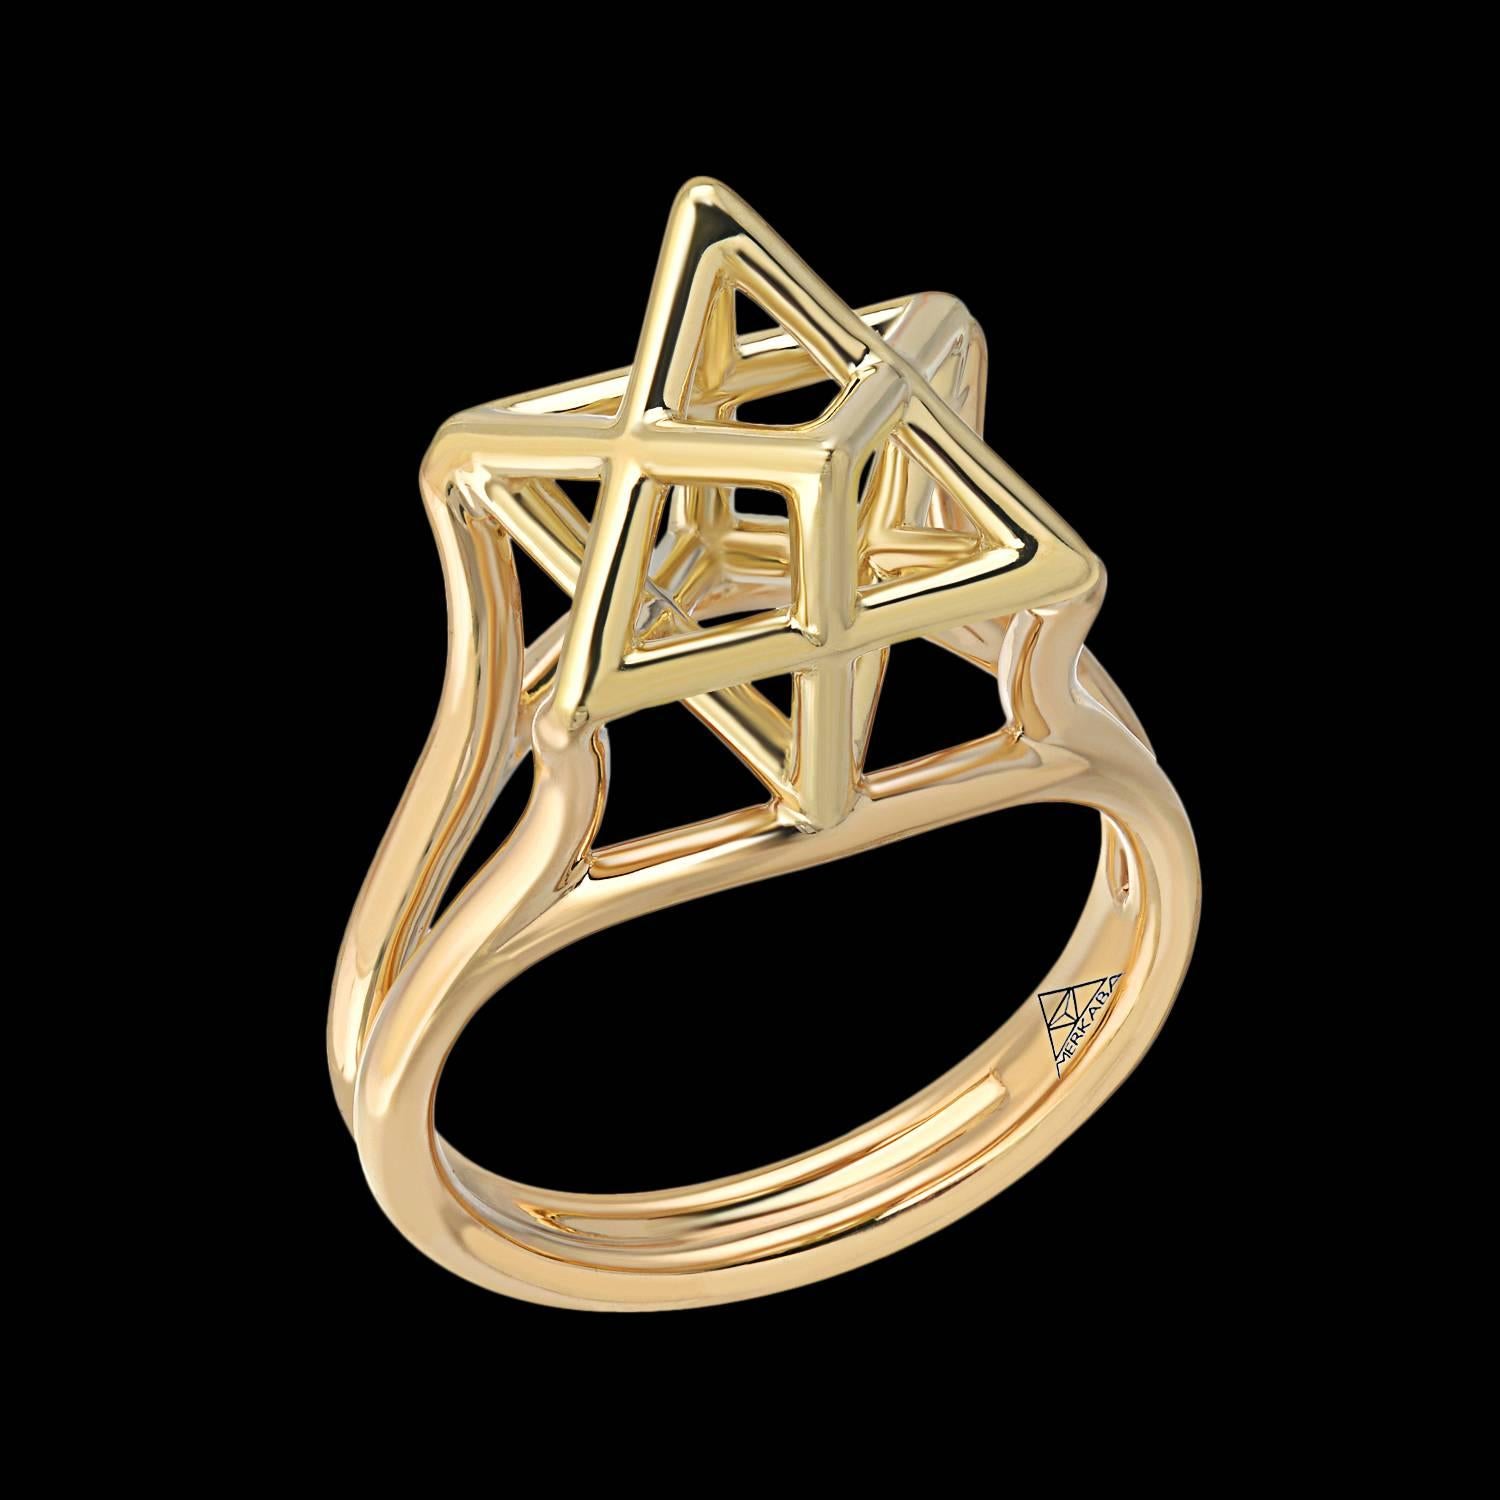 This Merkaba 18k yellow gold ring, features an architectural design, extending upward from the hand, 0.43 inches, a stunning three-dimensional Star of David.
Size 6. Can be resized to fit.
*Each piece comes with a certificate of authenticity and